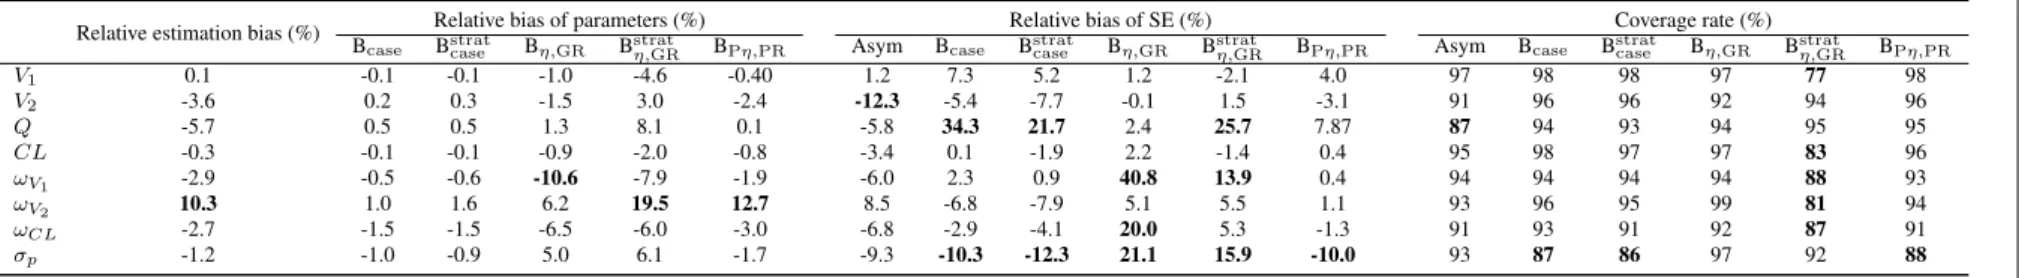 Table 2: Relative estimation bias, relative bootstrap bias, relative bias of standard error (SE) estimates and coverage rate obtained by the asymptotic method (Asym) via the M F and the three bootstrap methods for the unbalanced design with first-order eli